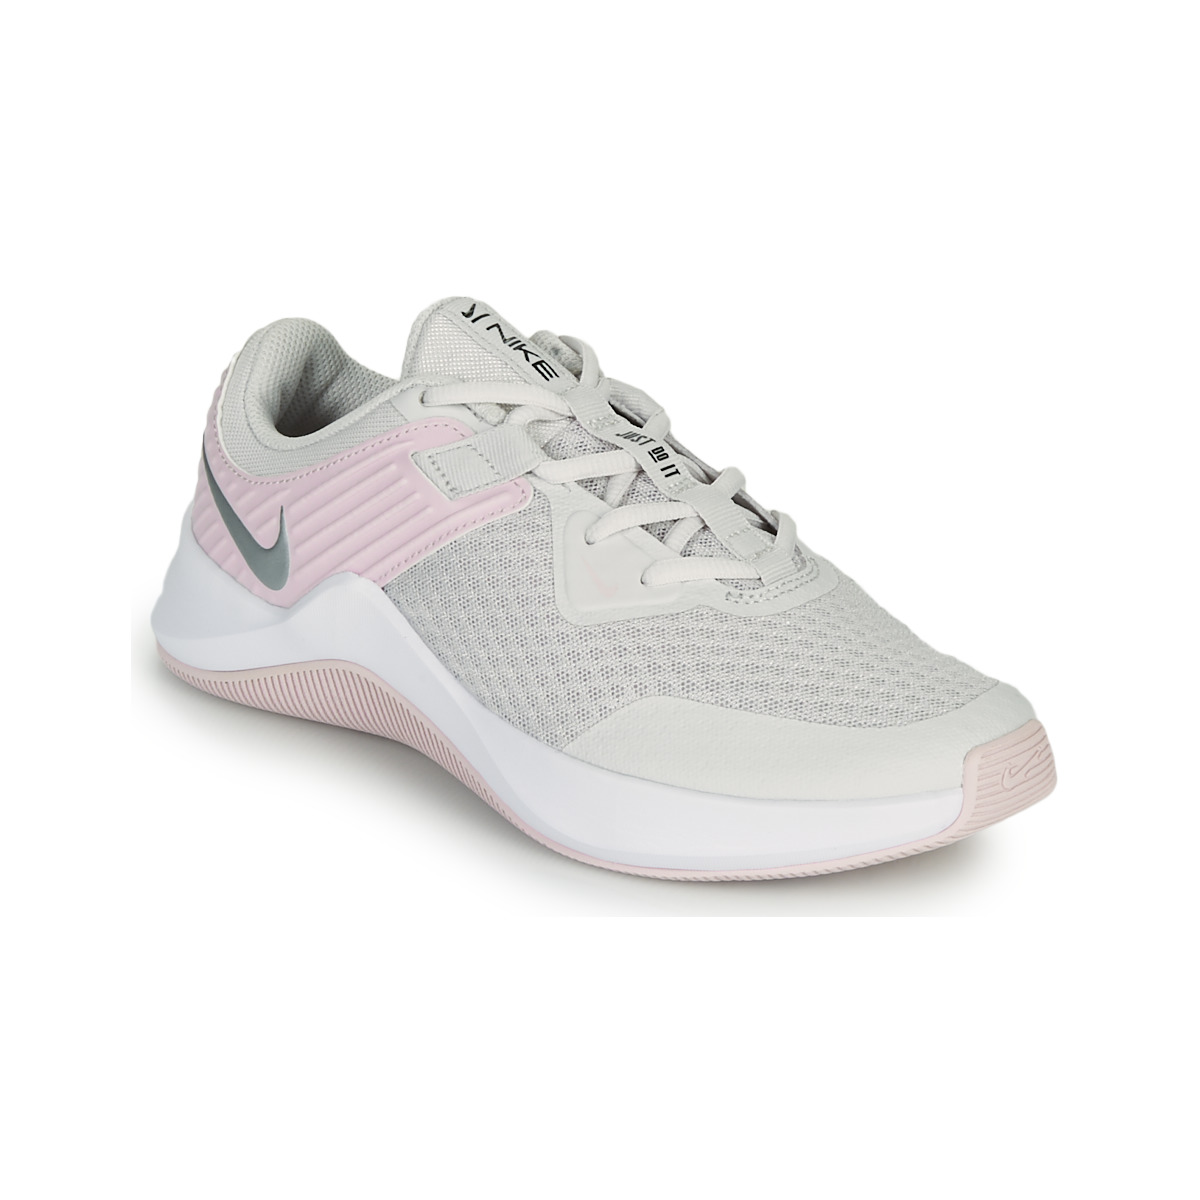 Nike store MC TRAINER 19008192 1200 A